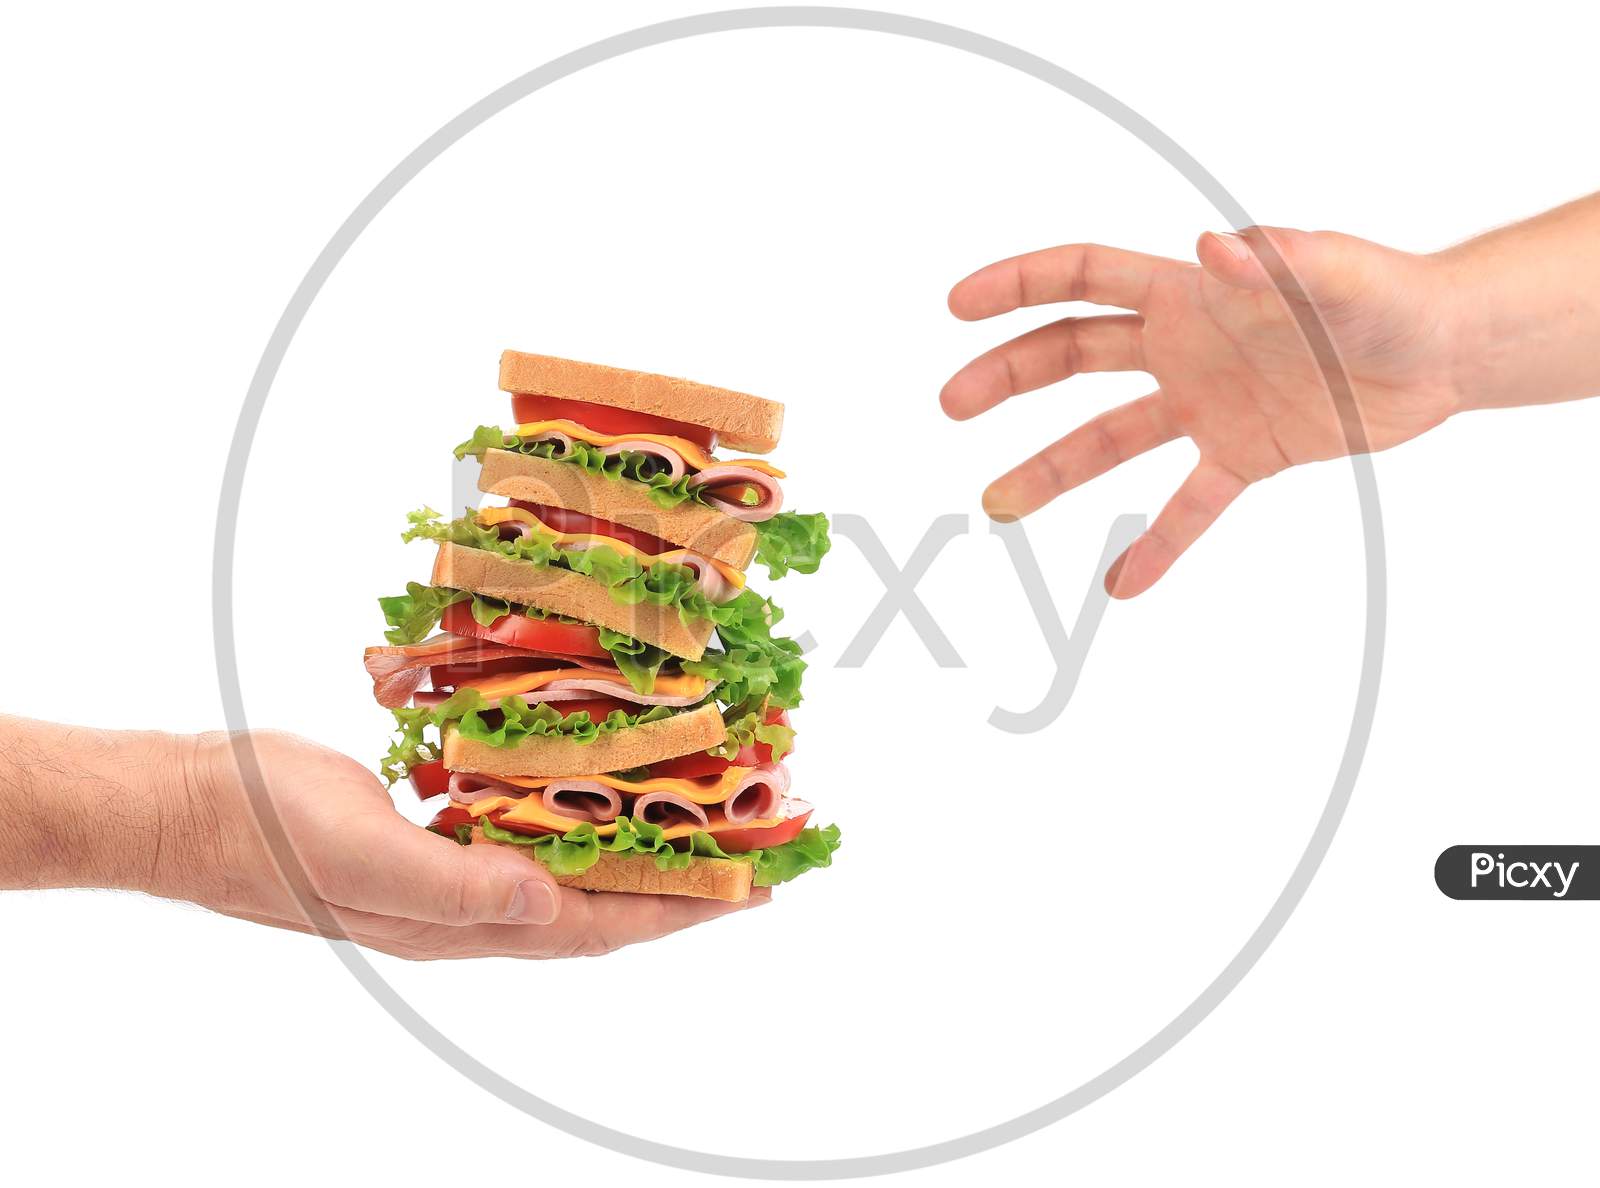 Sandwich With Tomato And Cheese In Hands. Isolated On A White Background.